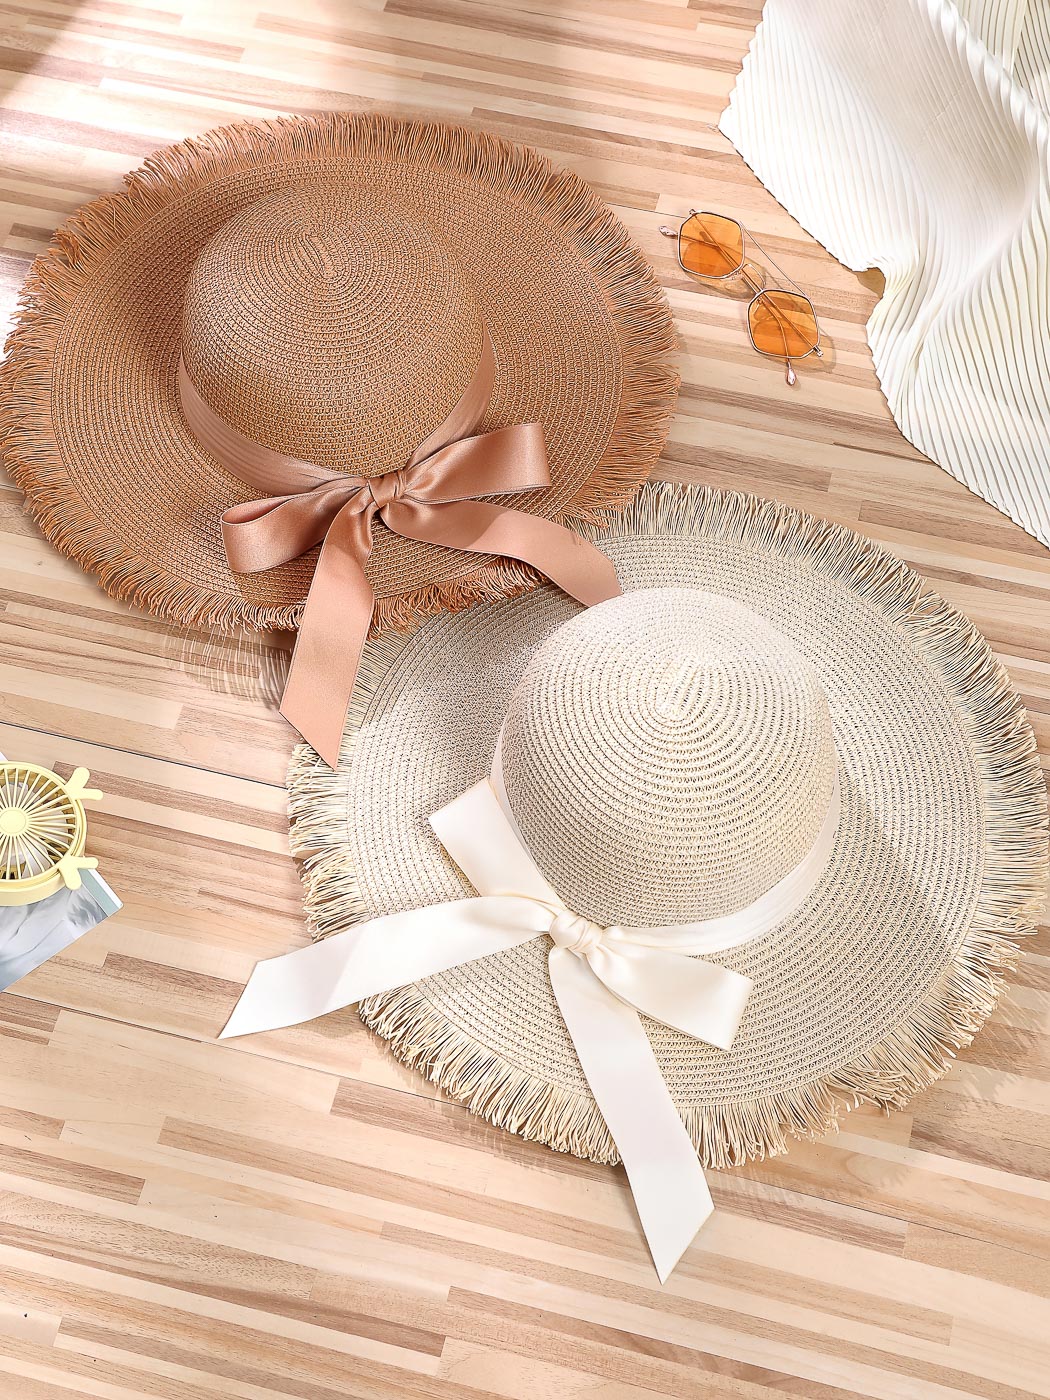 MINISO HAPPY VACATION STRAW HAT ( CREAMY WHITE ) 2010116710104 FASHIONABLE HAT-3